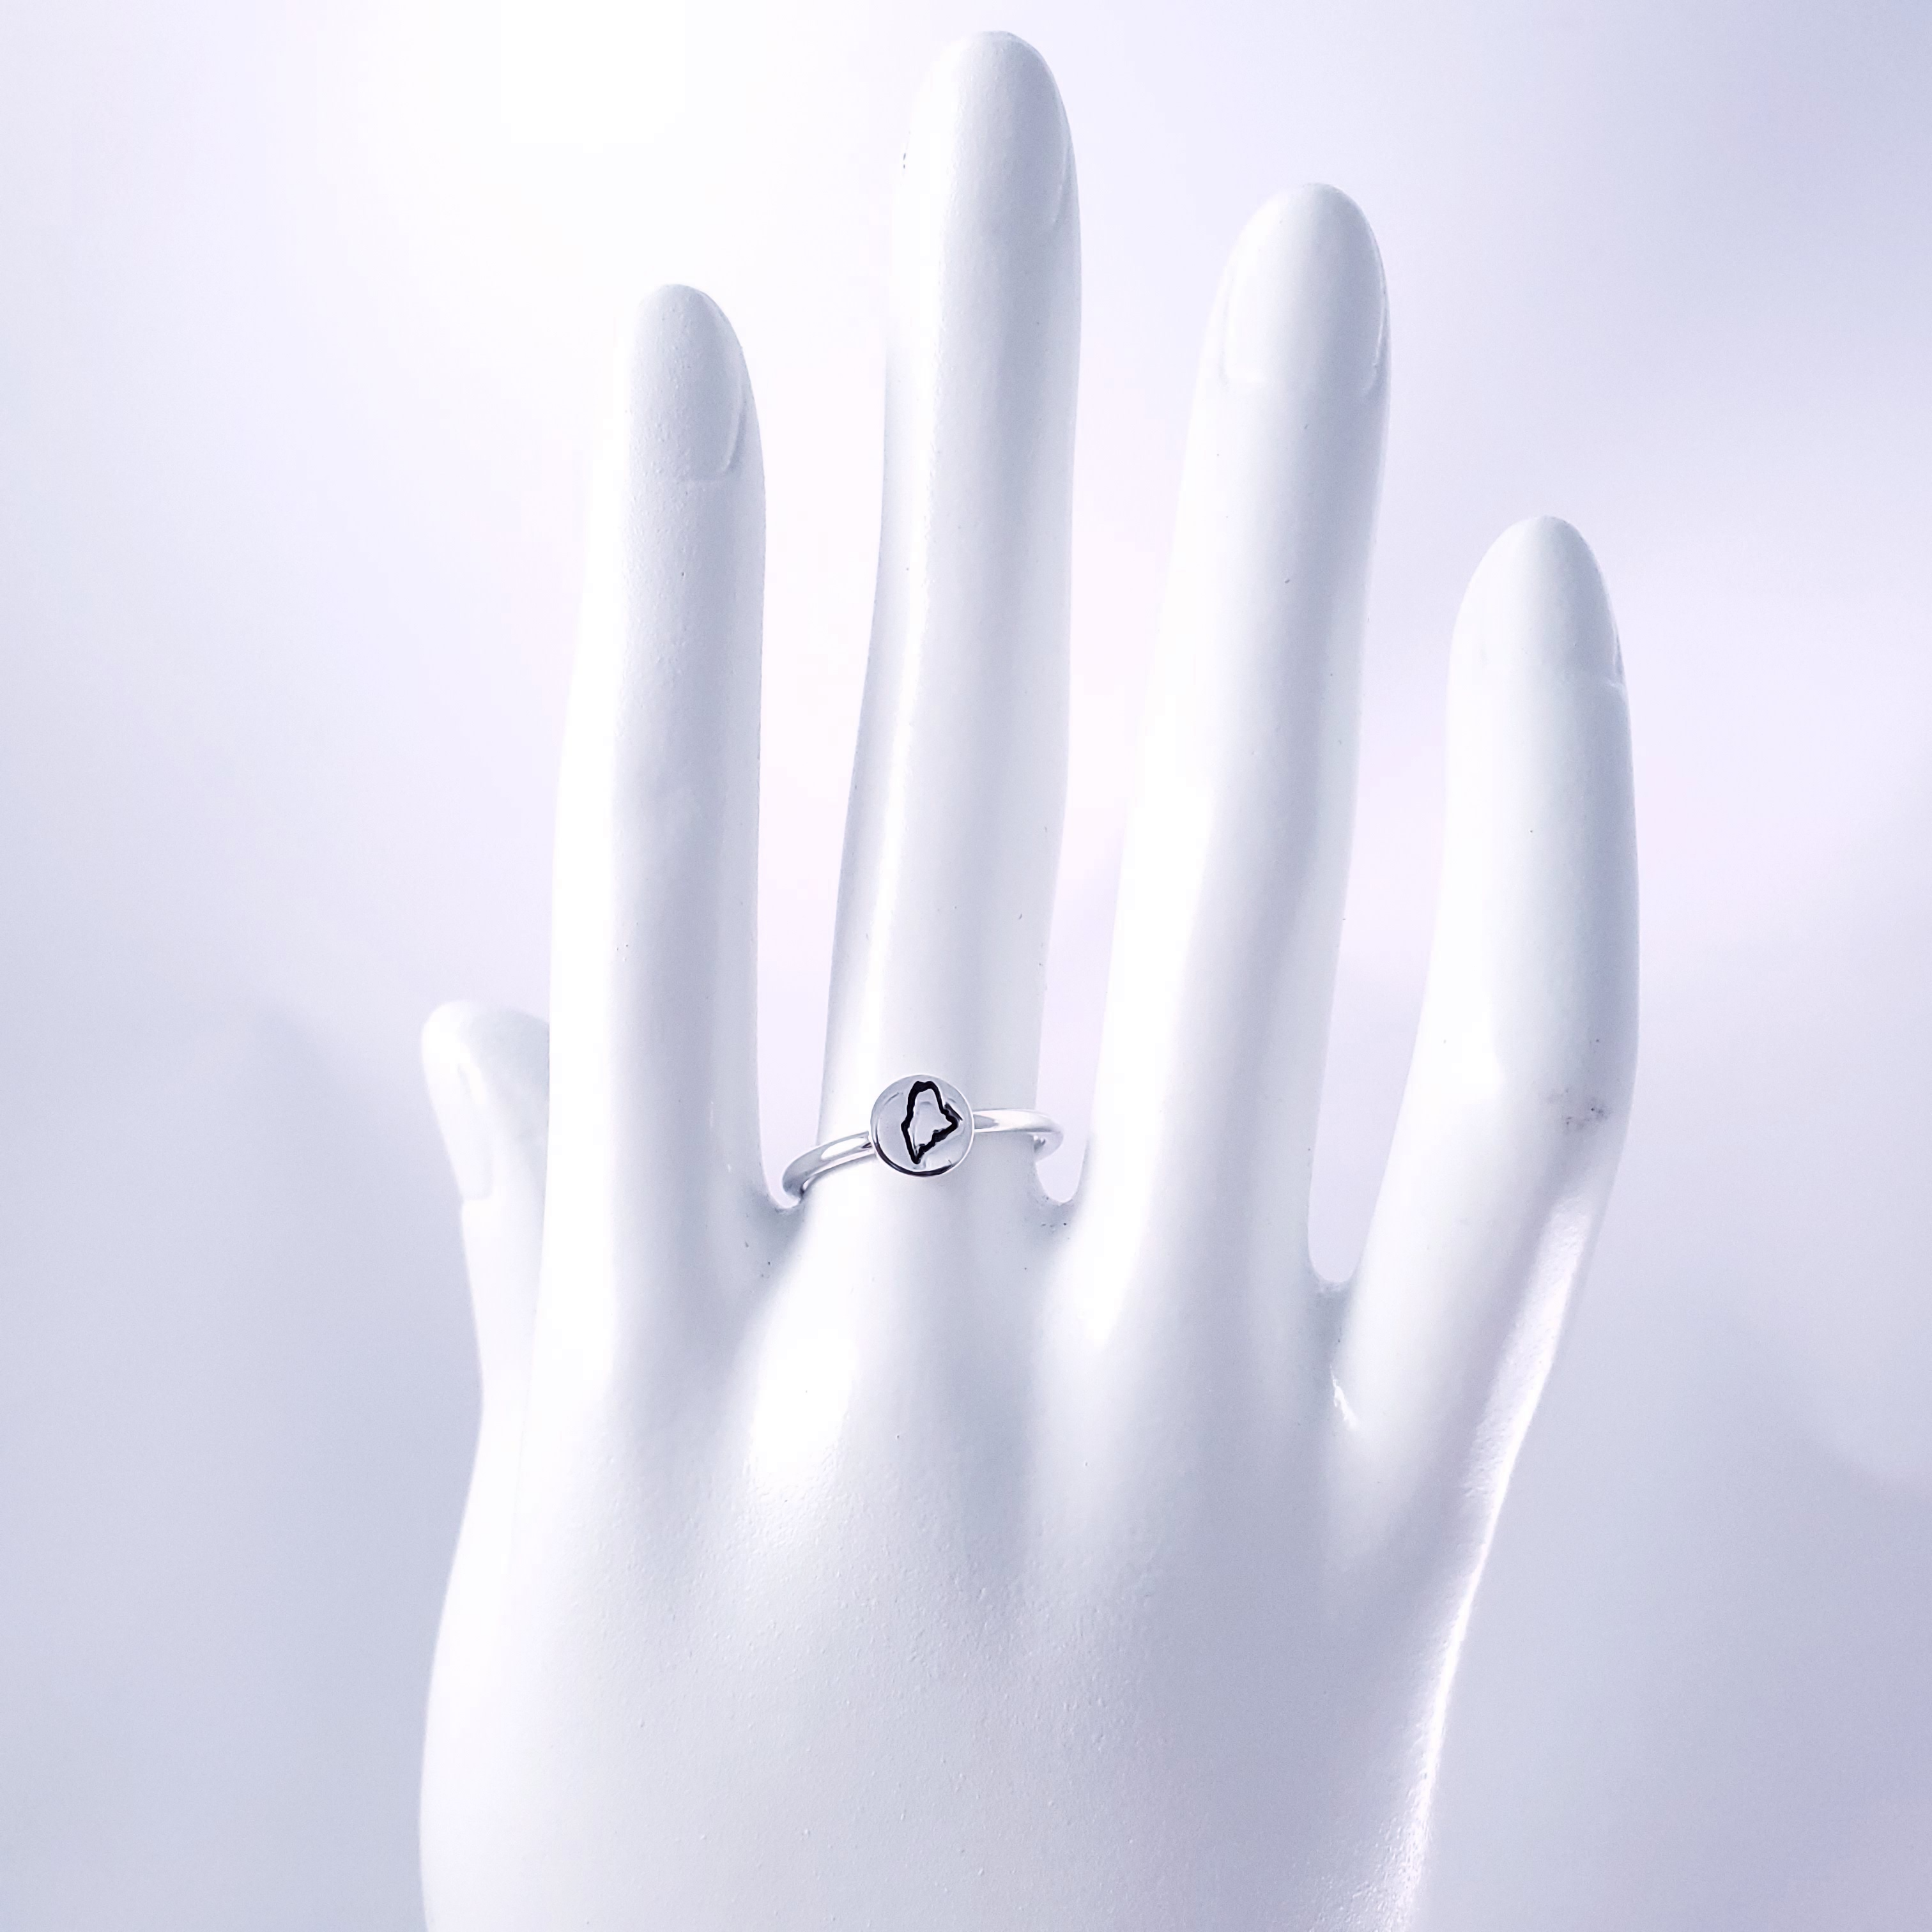 Maine ring on mannequin hand